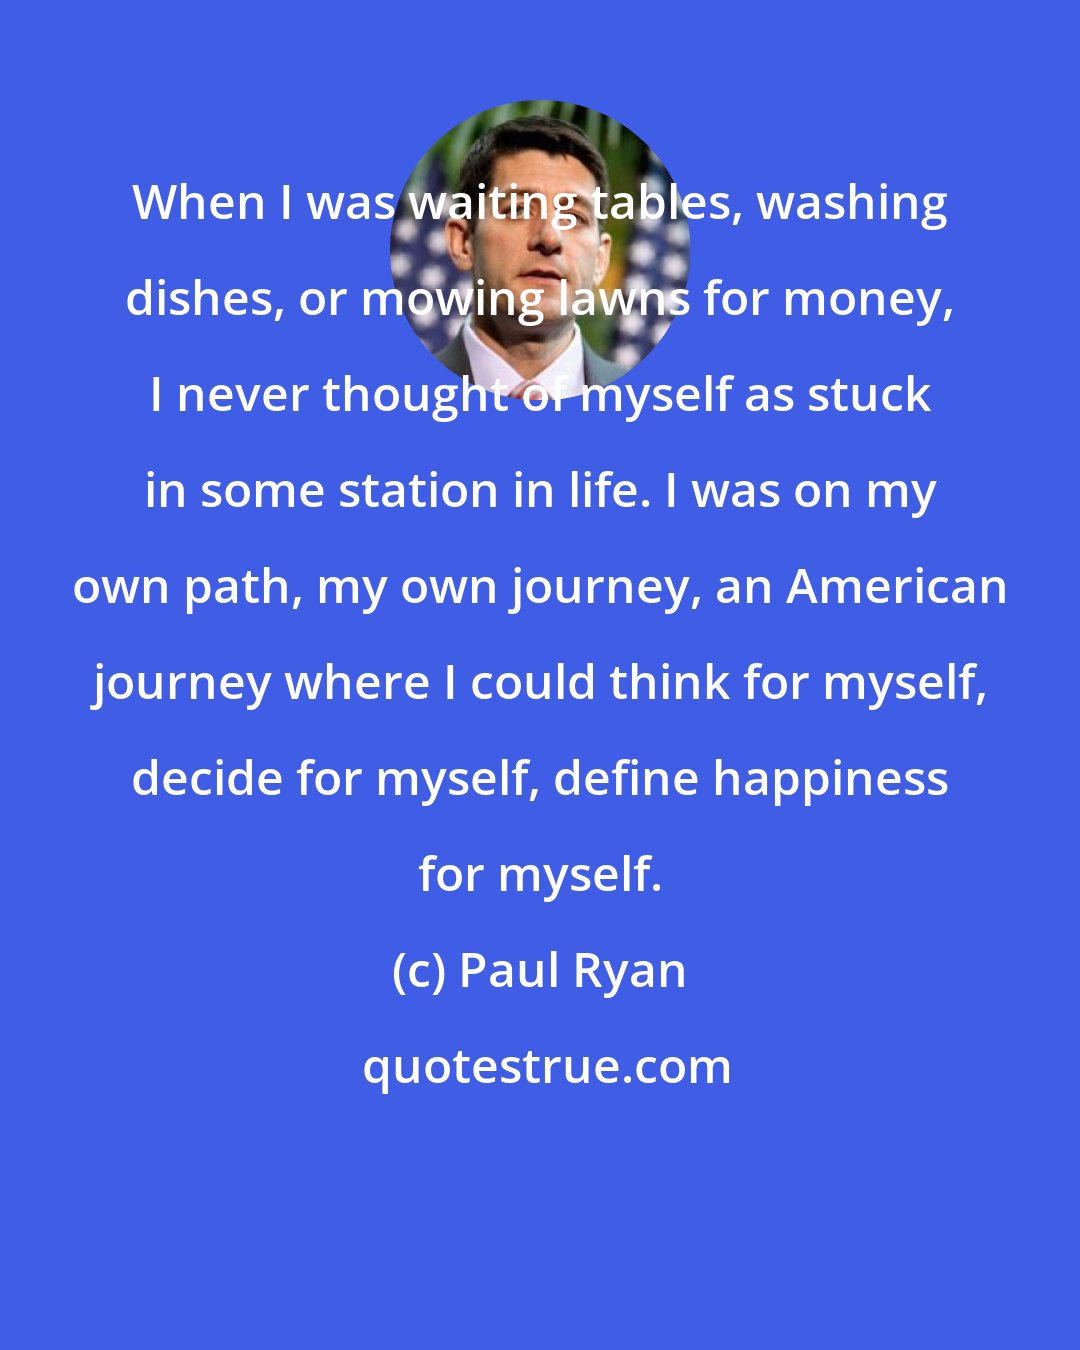 Paul Ryan: When I was waiting tables, washing dishes, or mowing lawns for money, I never thought of myself as stuck in some station in life. I was on my own path, my own journey, an American journey where I could think for myself, decide for myself, define happiness for myself.